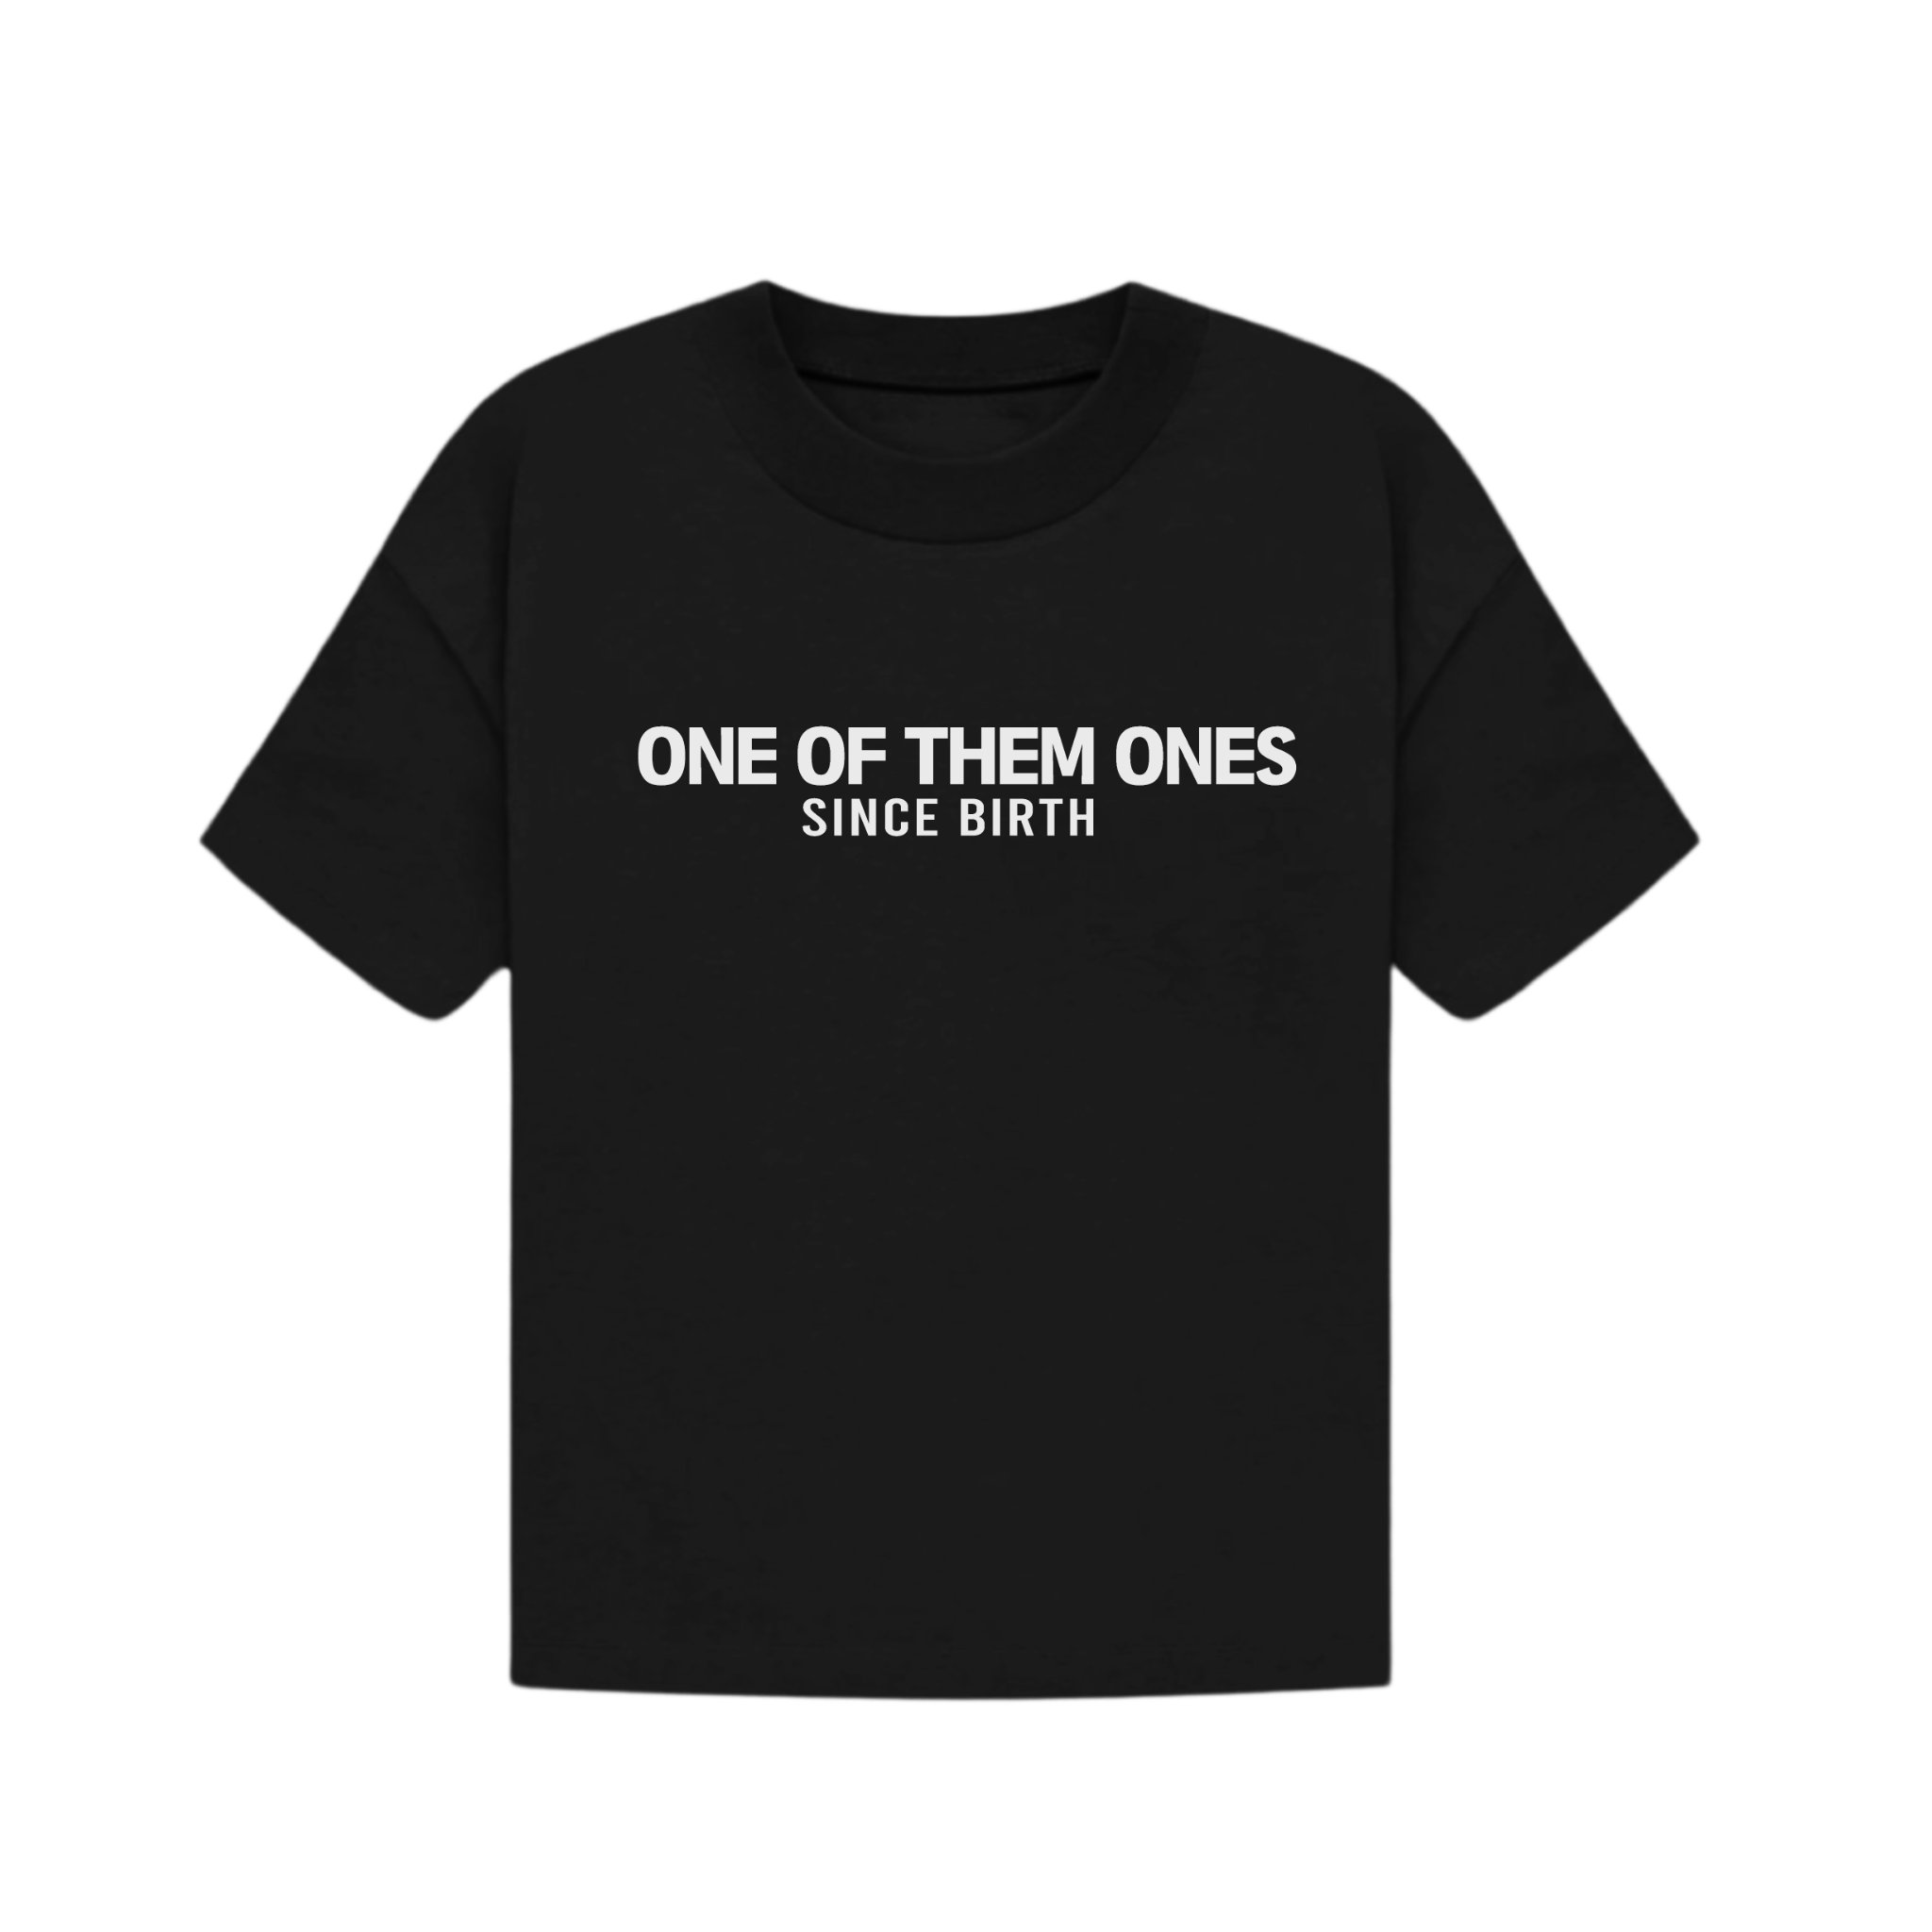 One Of Them Ones Since Birth - T-Shirt